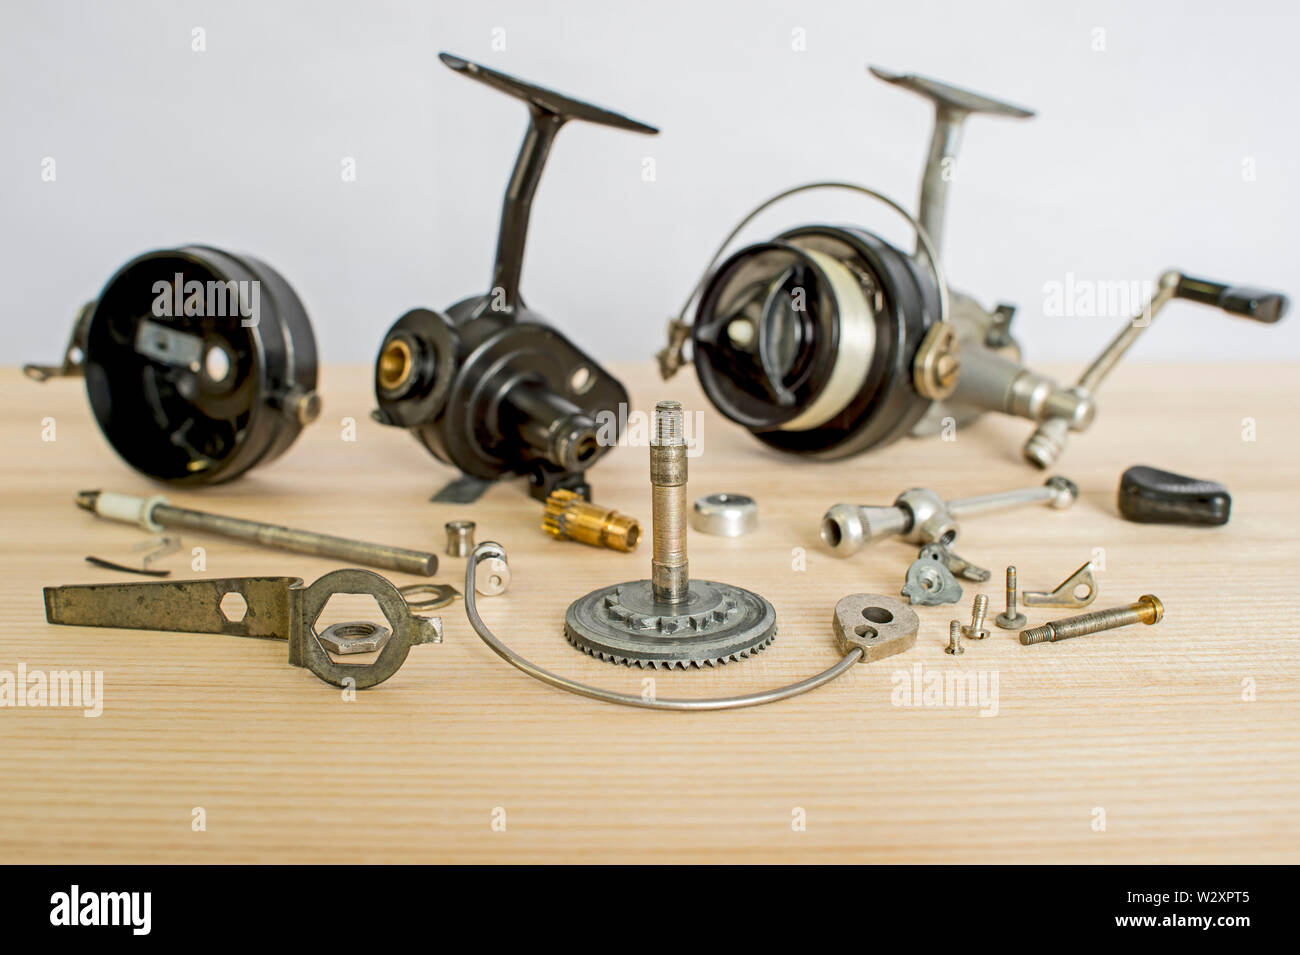 https://c8.alamy.com/comp/W2XPT5/a-fishing-spinning-reel-as-a-whole-and-a-second-similar-completely-disassembled-concept-parts-of-a-whole-W2XPT5.jpg